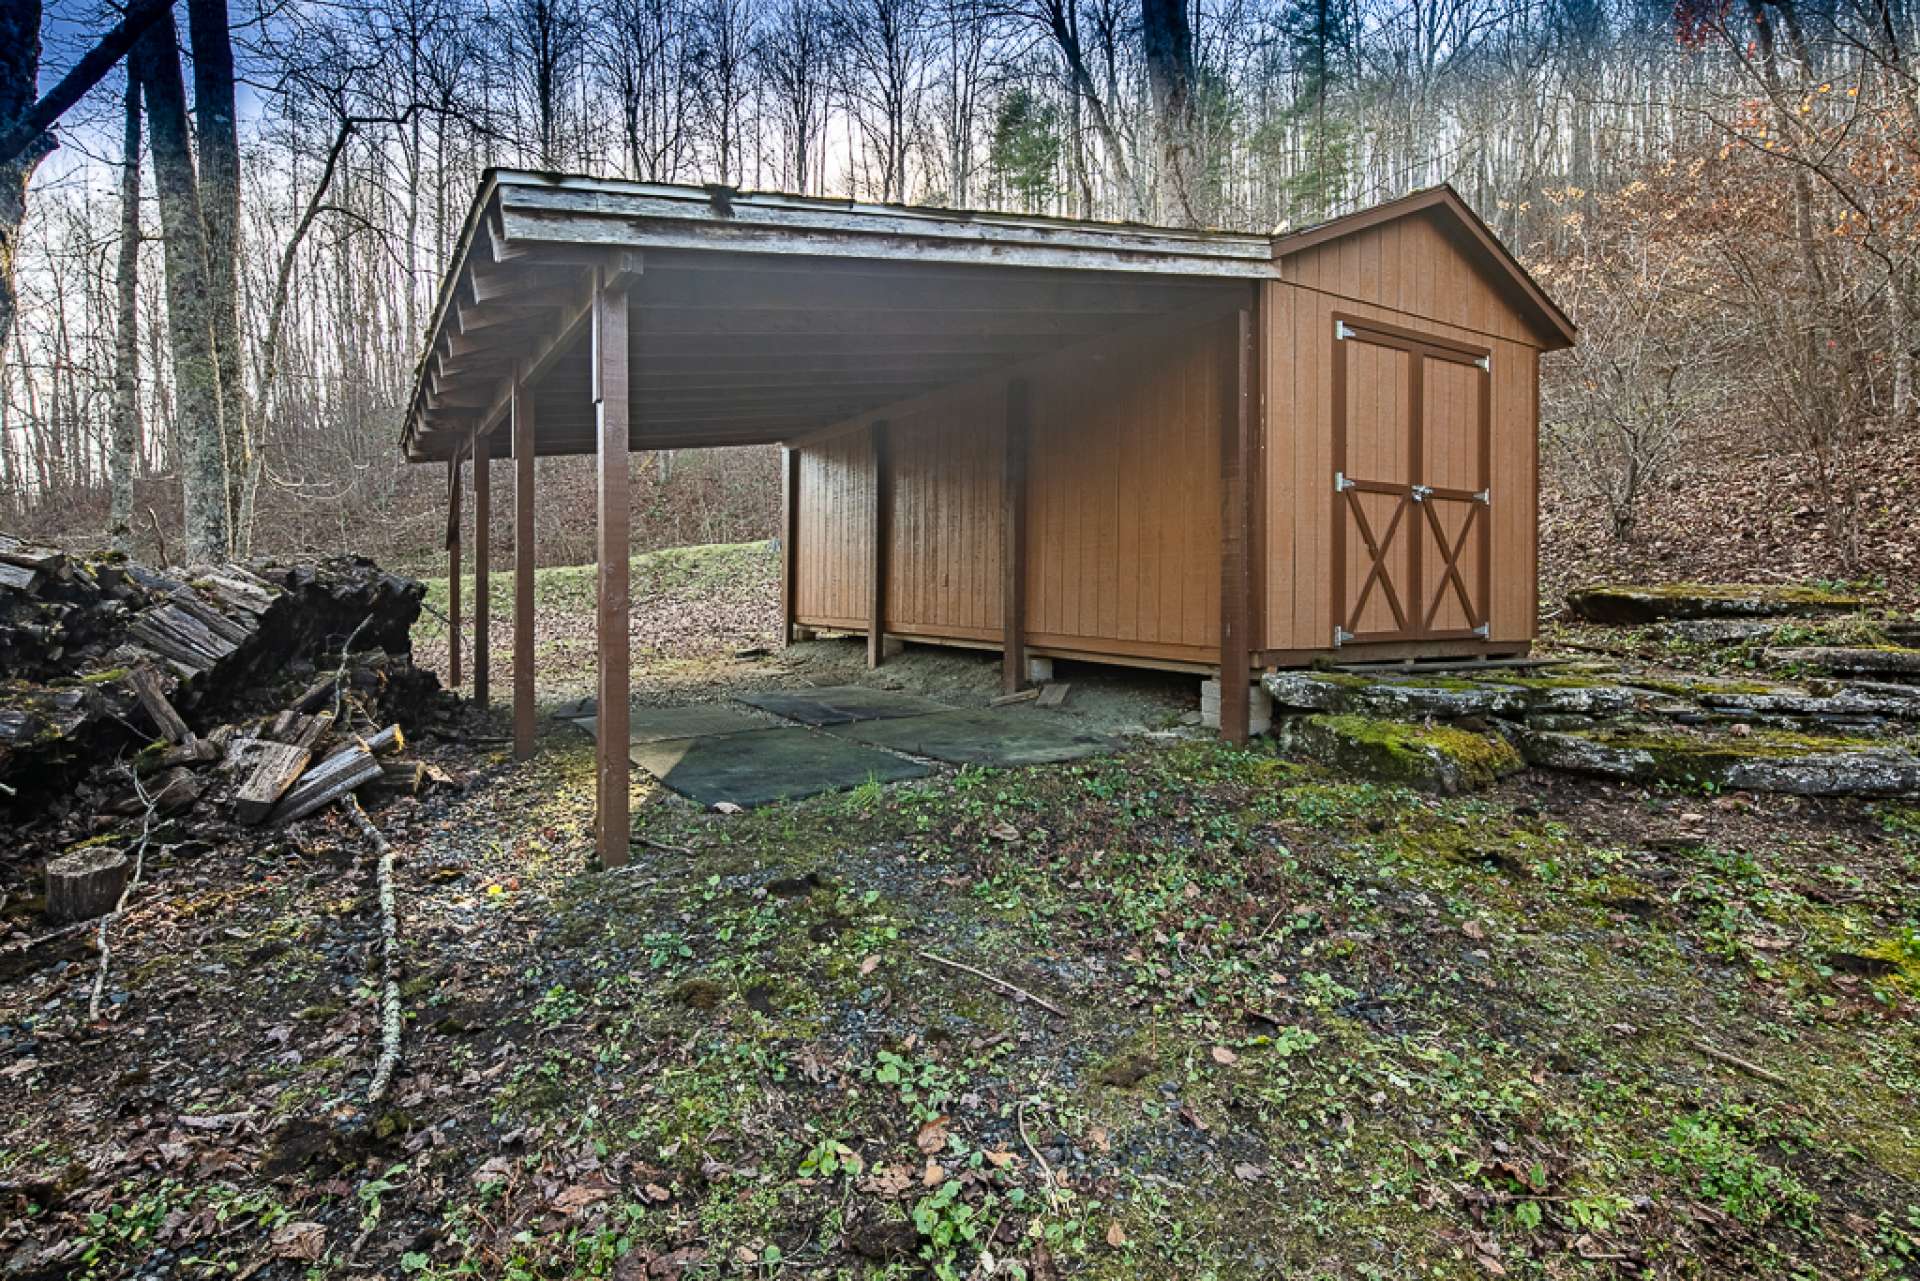 This outbuilding is ideal for lawn and gardening equipment, as well as storage for firewood.